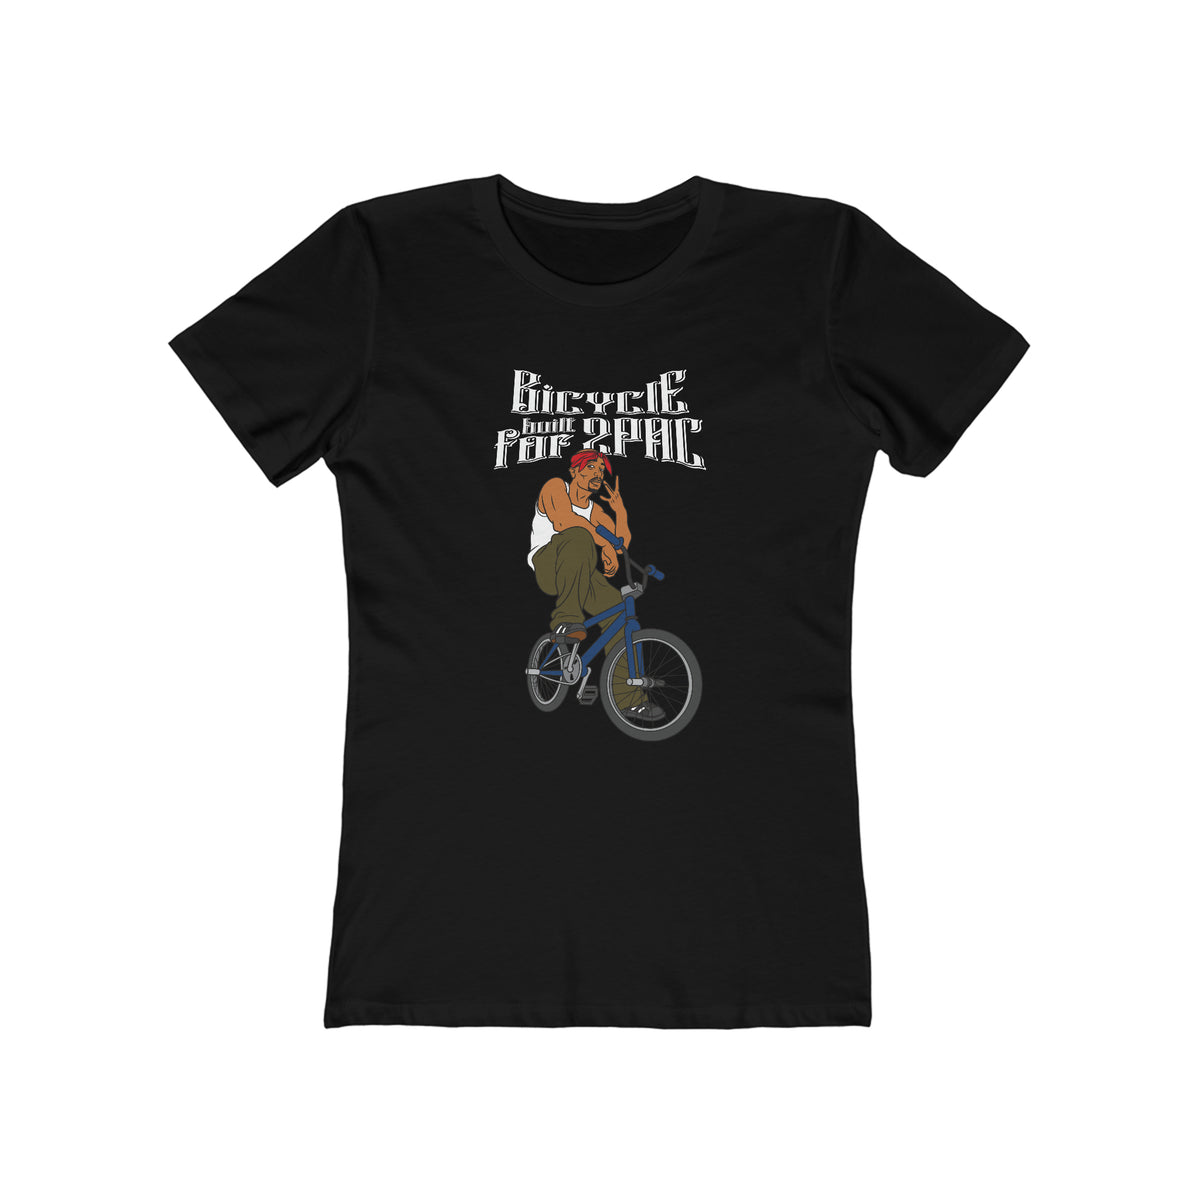 Bicycle Built For 2Pac - Women’s T-Shirt